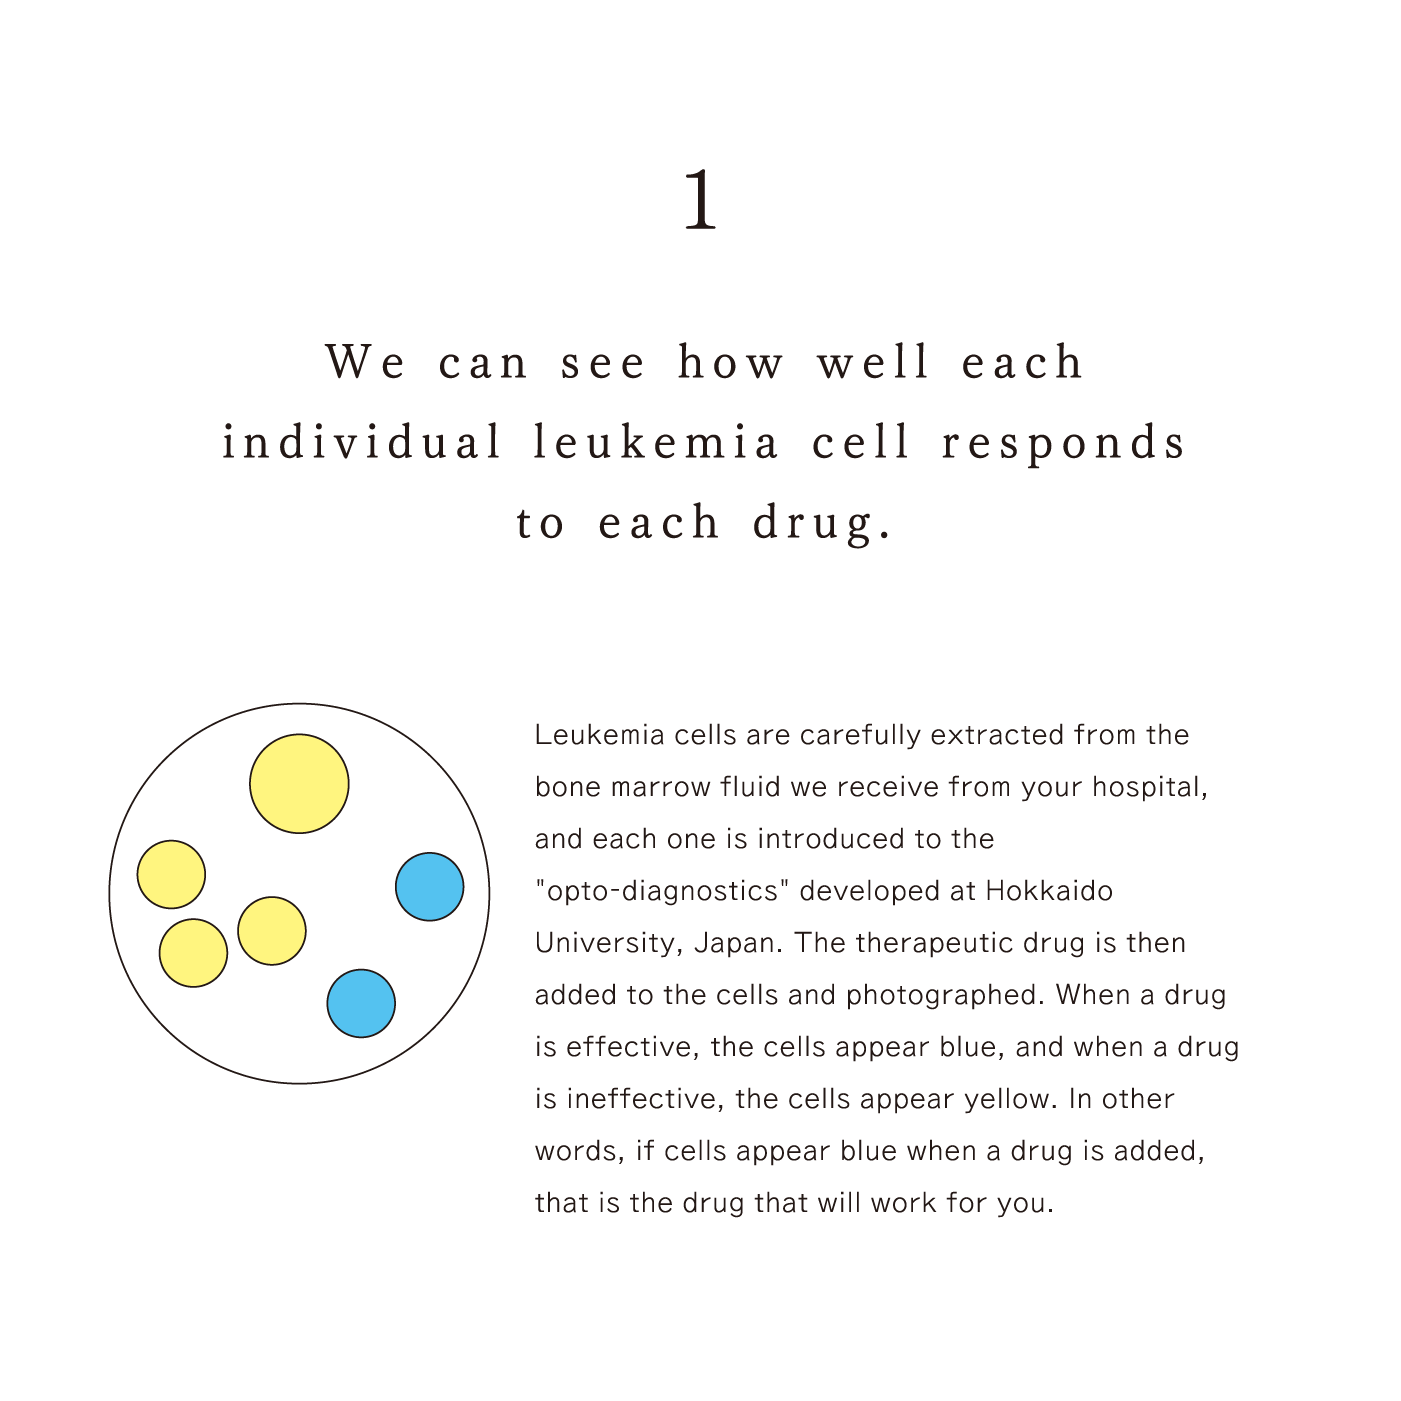 1.We can see how well each individual leukemia cell responds to each drug.